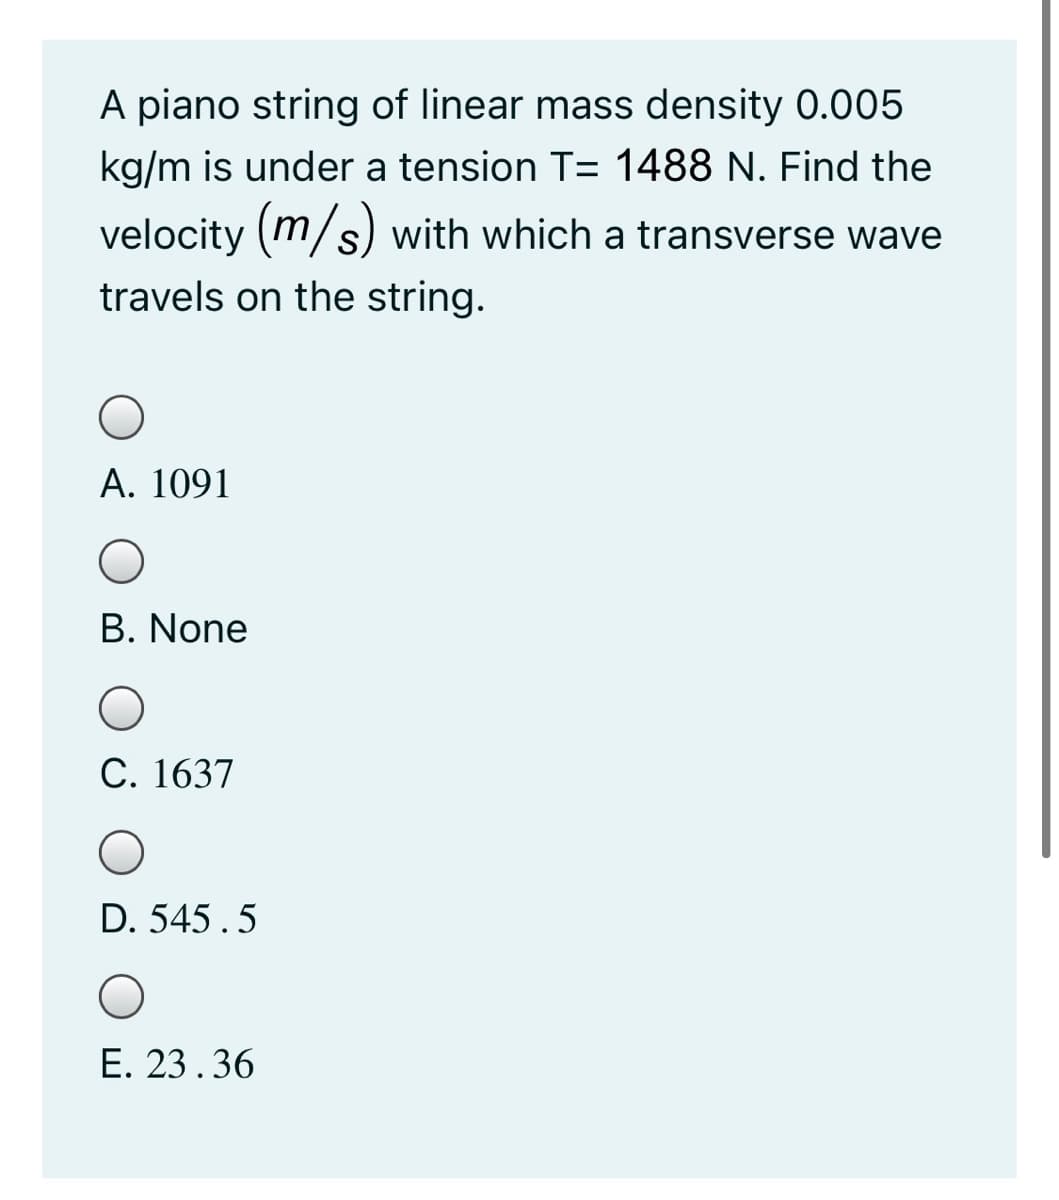 A piano string of linear mass density 0.005
kg/m is under a tension T= 1488 N. Find the
velocity (m/s) with which a transverse wave
travels on the string.
A. 1091
B. None
С. 1637
D. 545.5
E. 23.36
